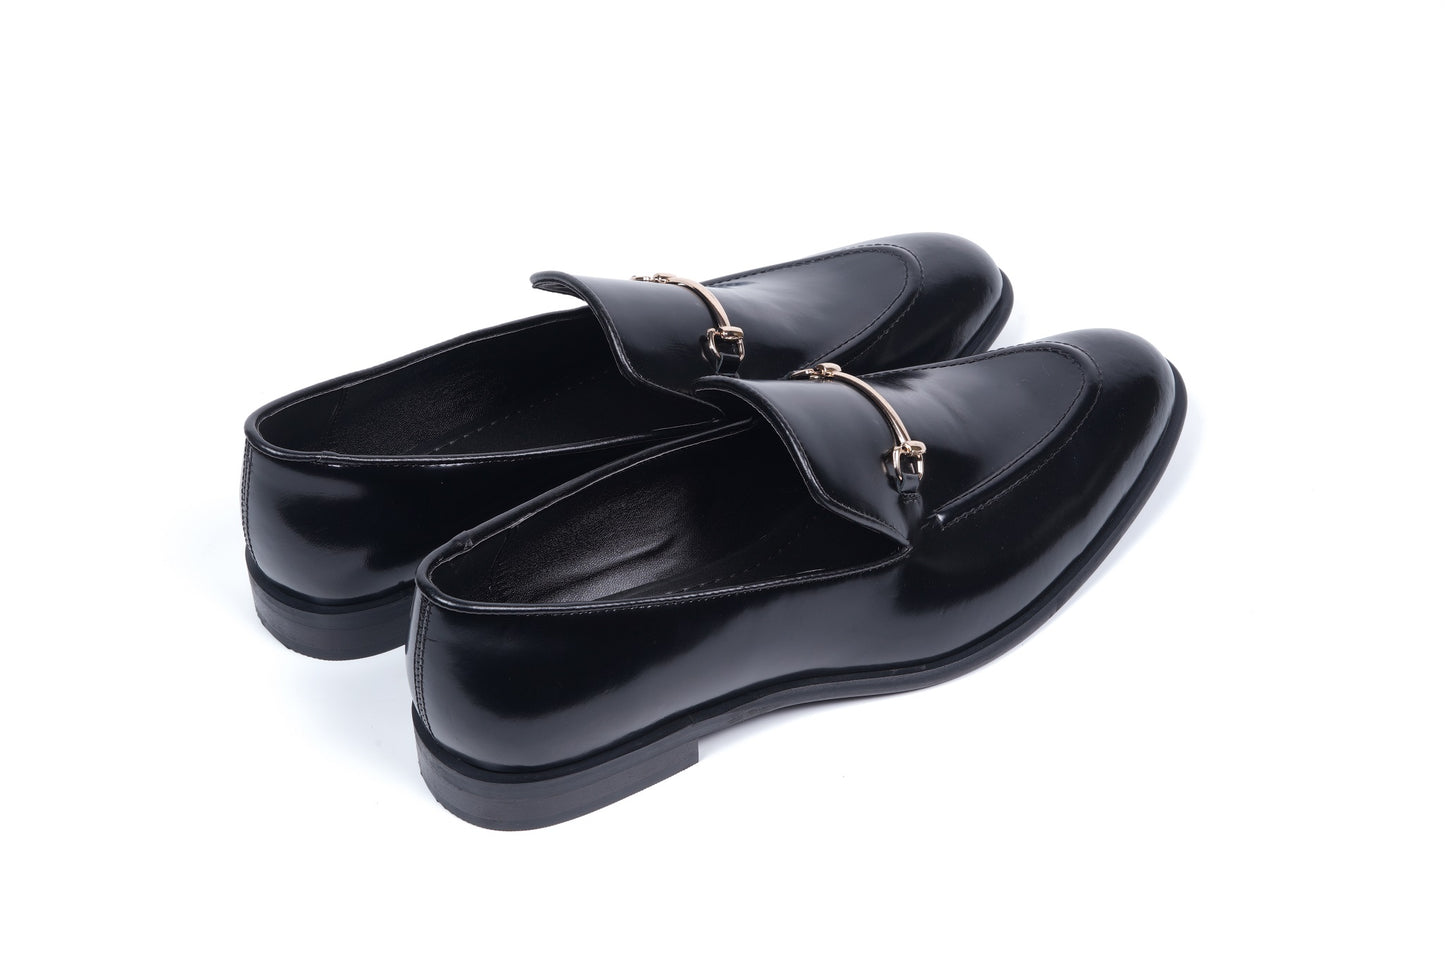 SMOOTH LEATHER SLIP ONS - BLACK